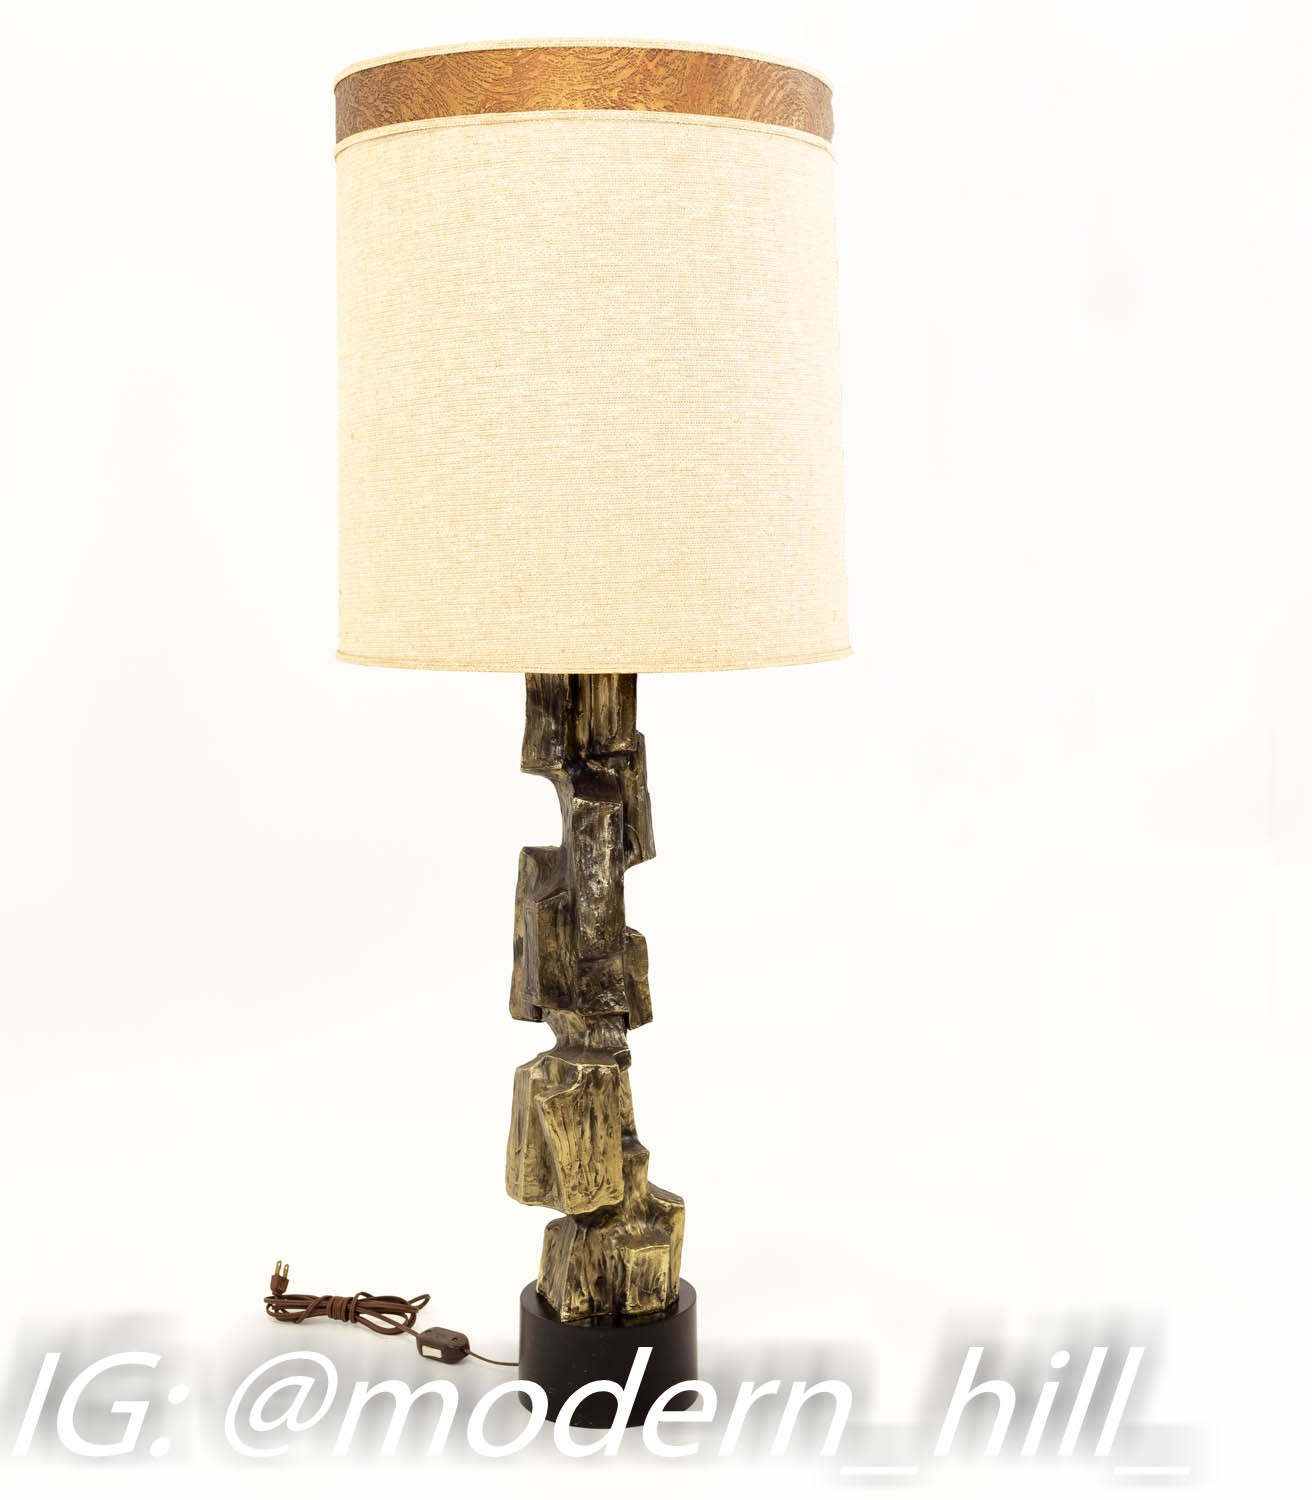 Richard Barr and Harold Weiss for Laurel Tall Weathered Brass Mid Century Table Lamp with Original Shade